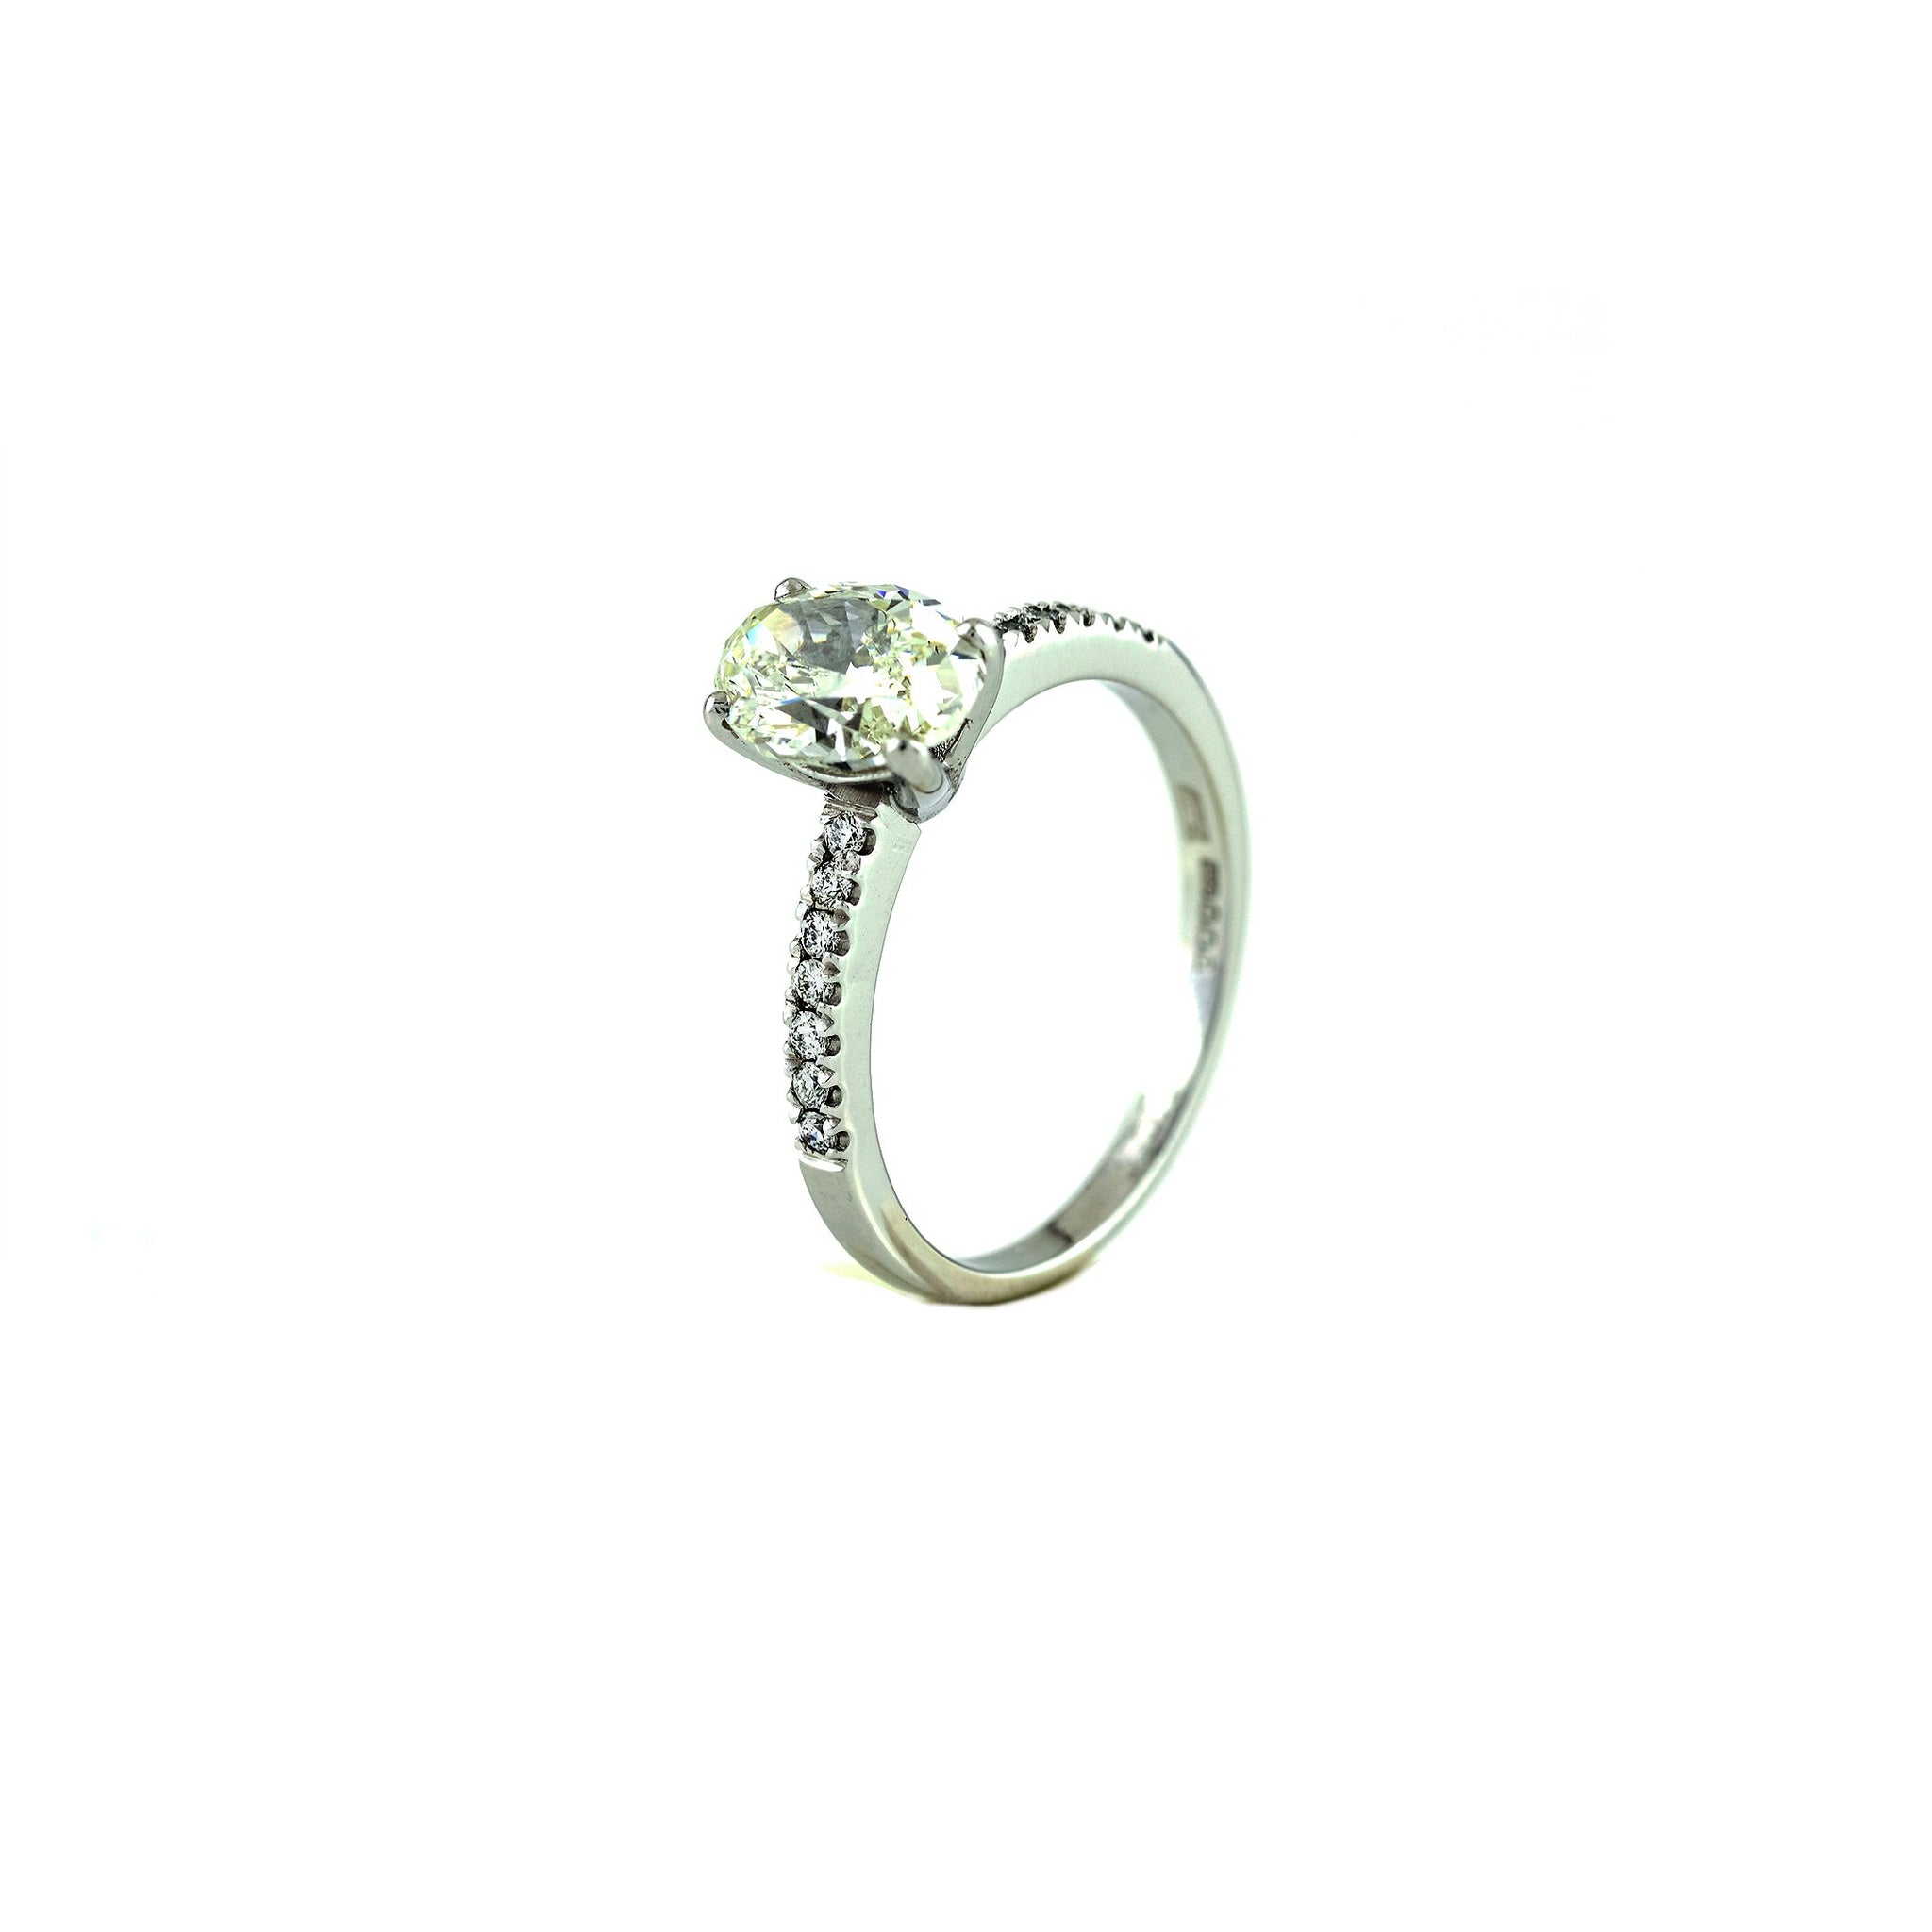 18ct White Gold 1.41ct Oval Diamond Solitaire Ring